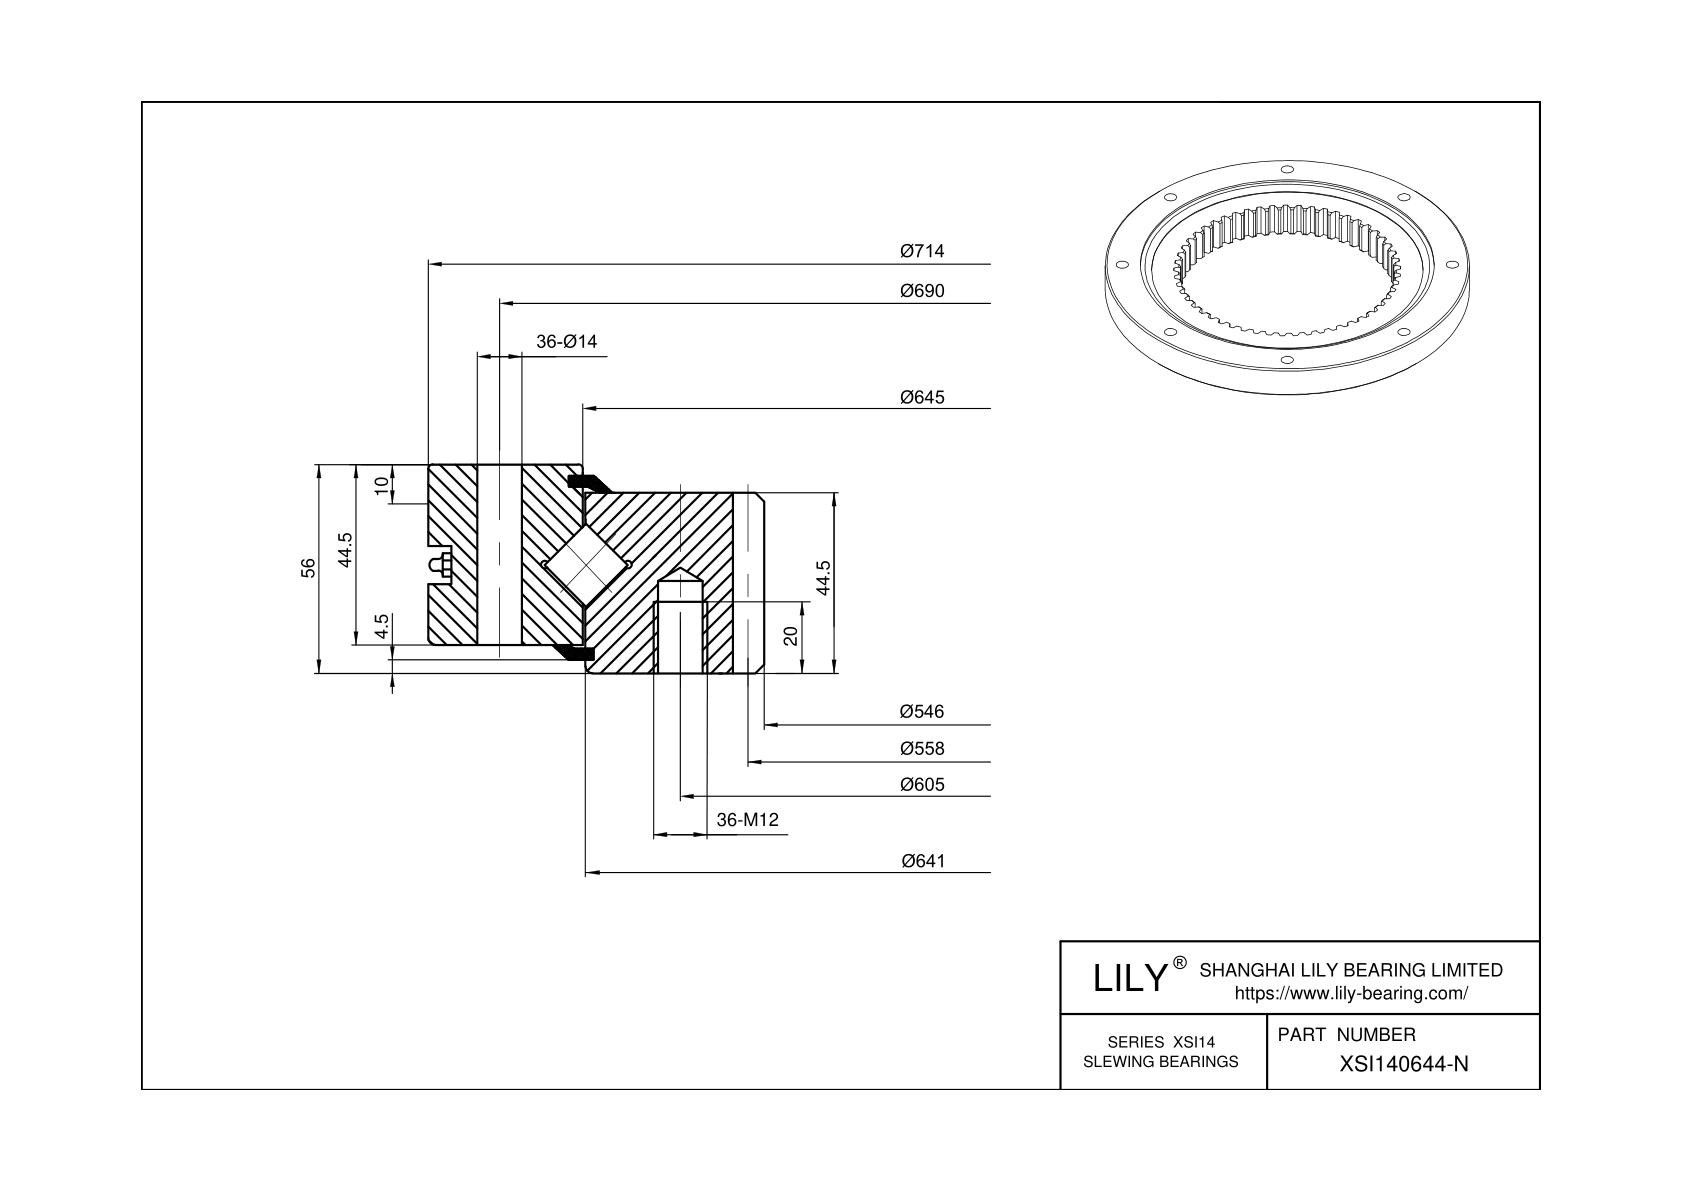 XSI140644-N-RR Cross Roller Slewing Ring Bearing cad drawing